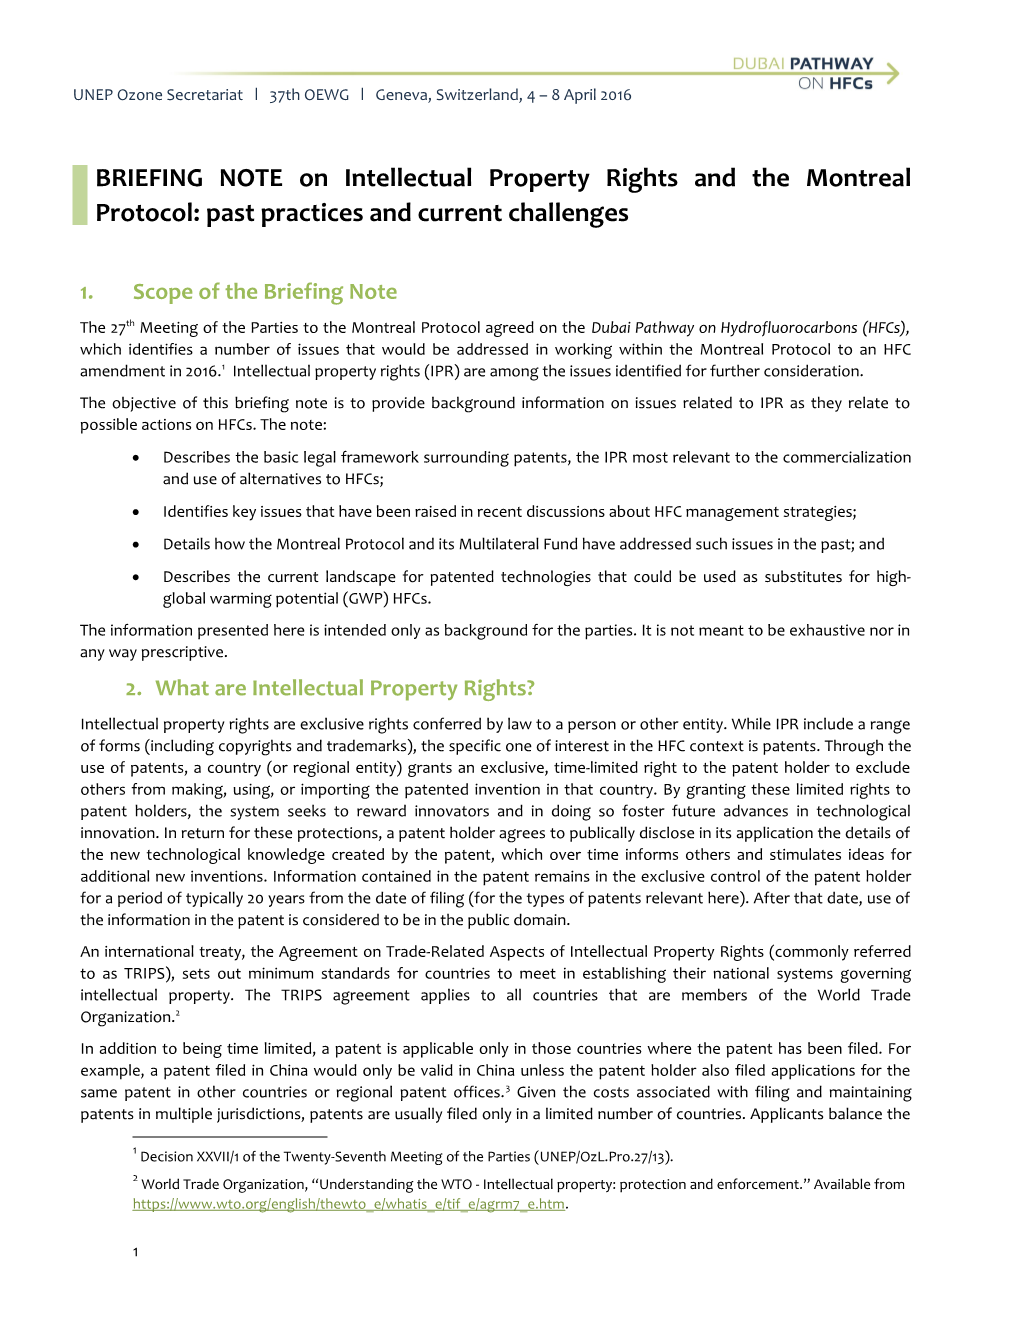 Briefing Note on Intellectual Property Rights and the Montreal Protocol: Past Practices